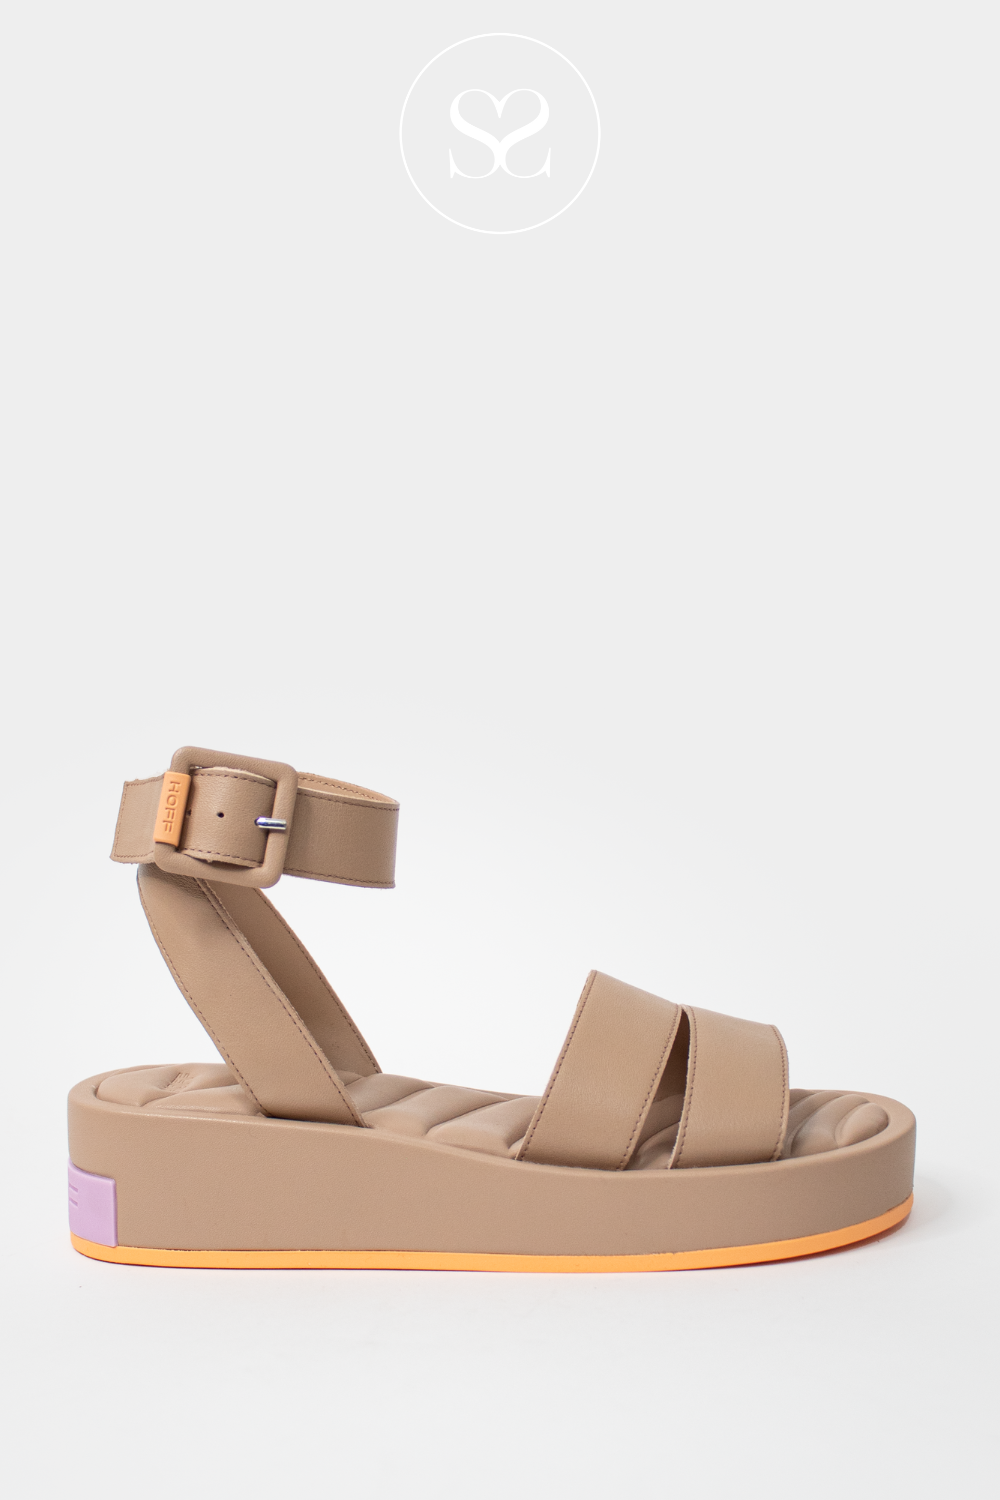 HOFF TOWN SANDALS FOR WOMEN IN TAUPE